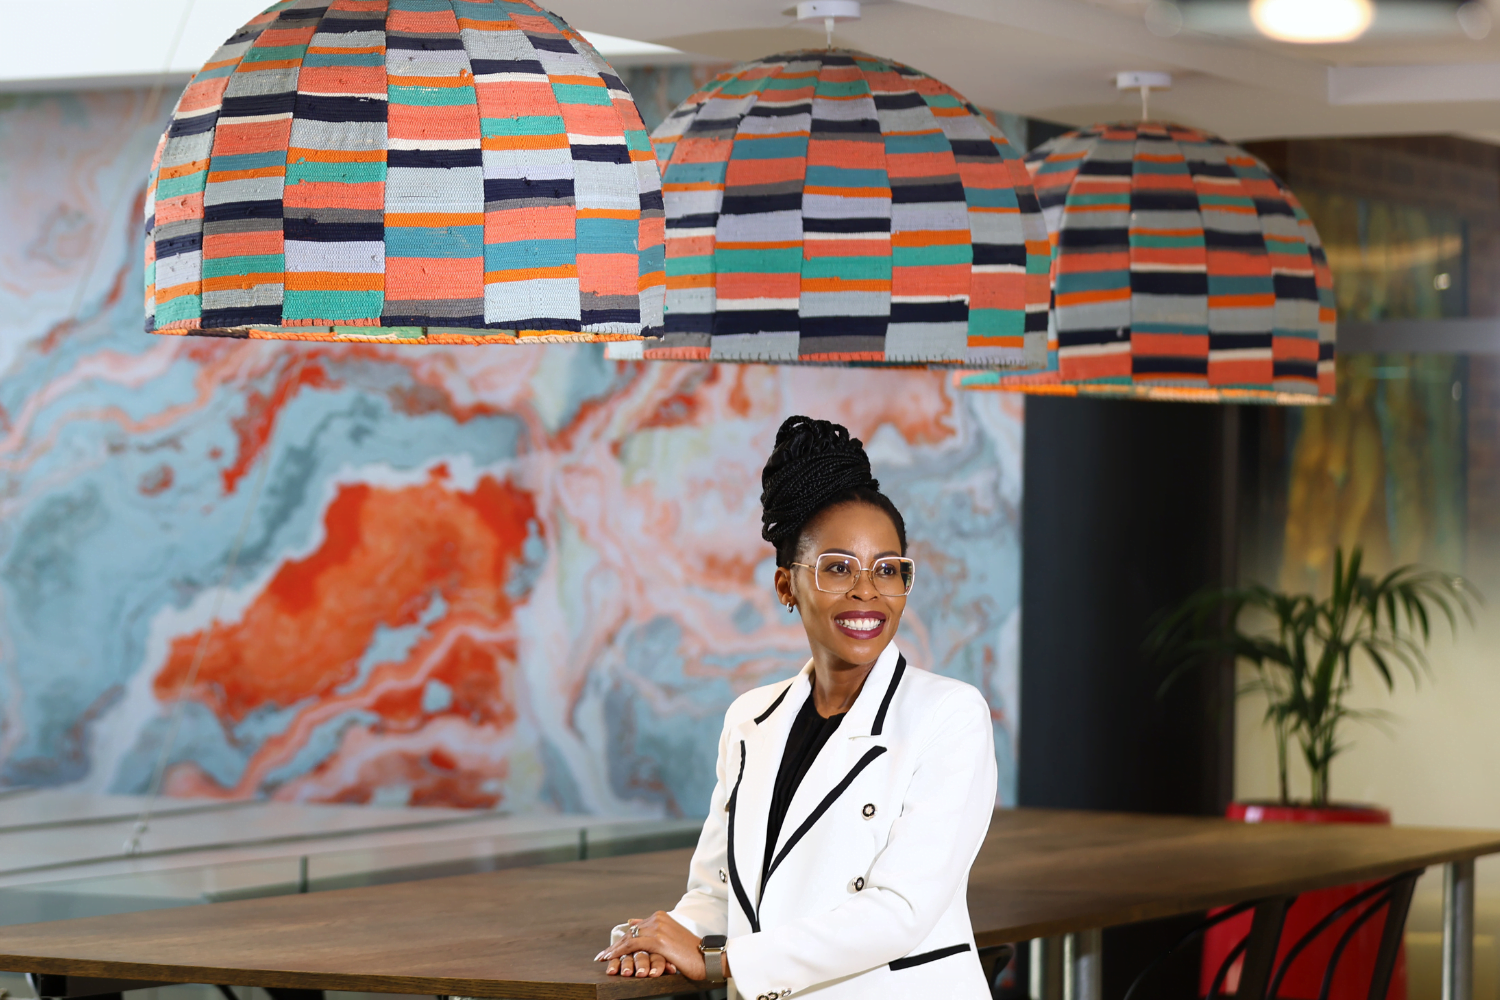 Queen Mokulubete, Founder of Somila Engineering, poses at a boardroom table in her office.